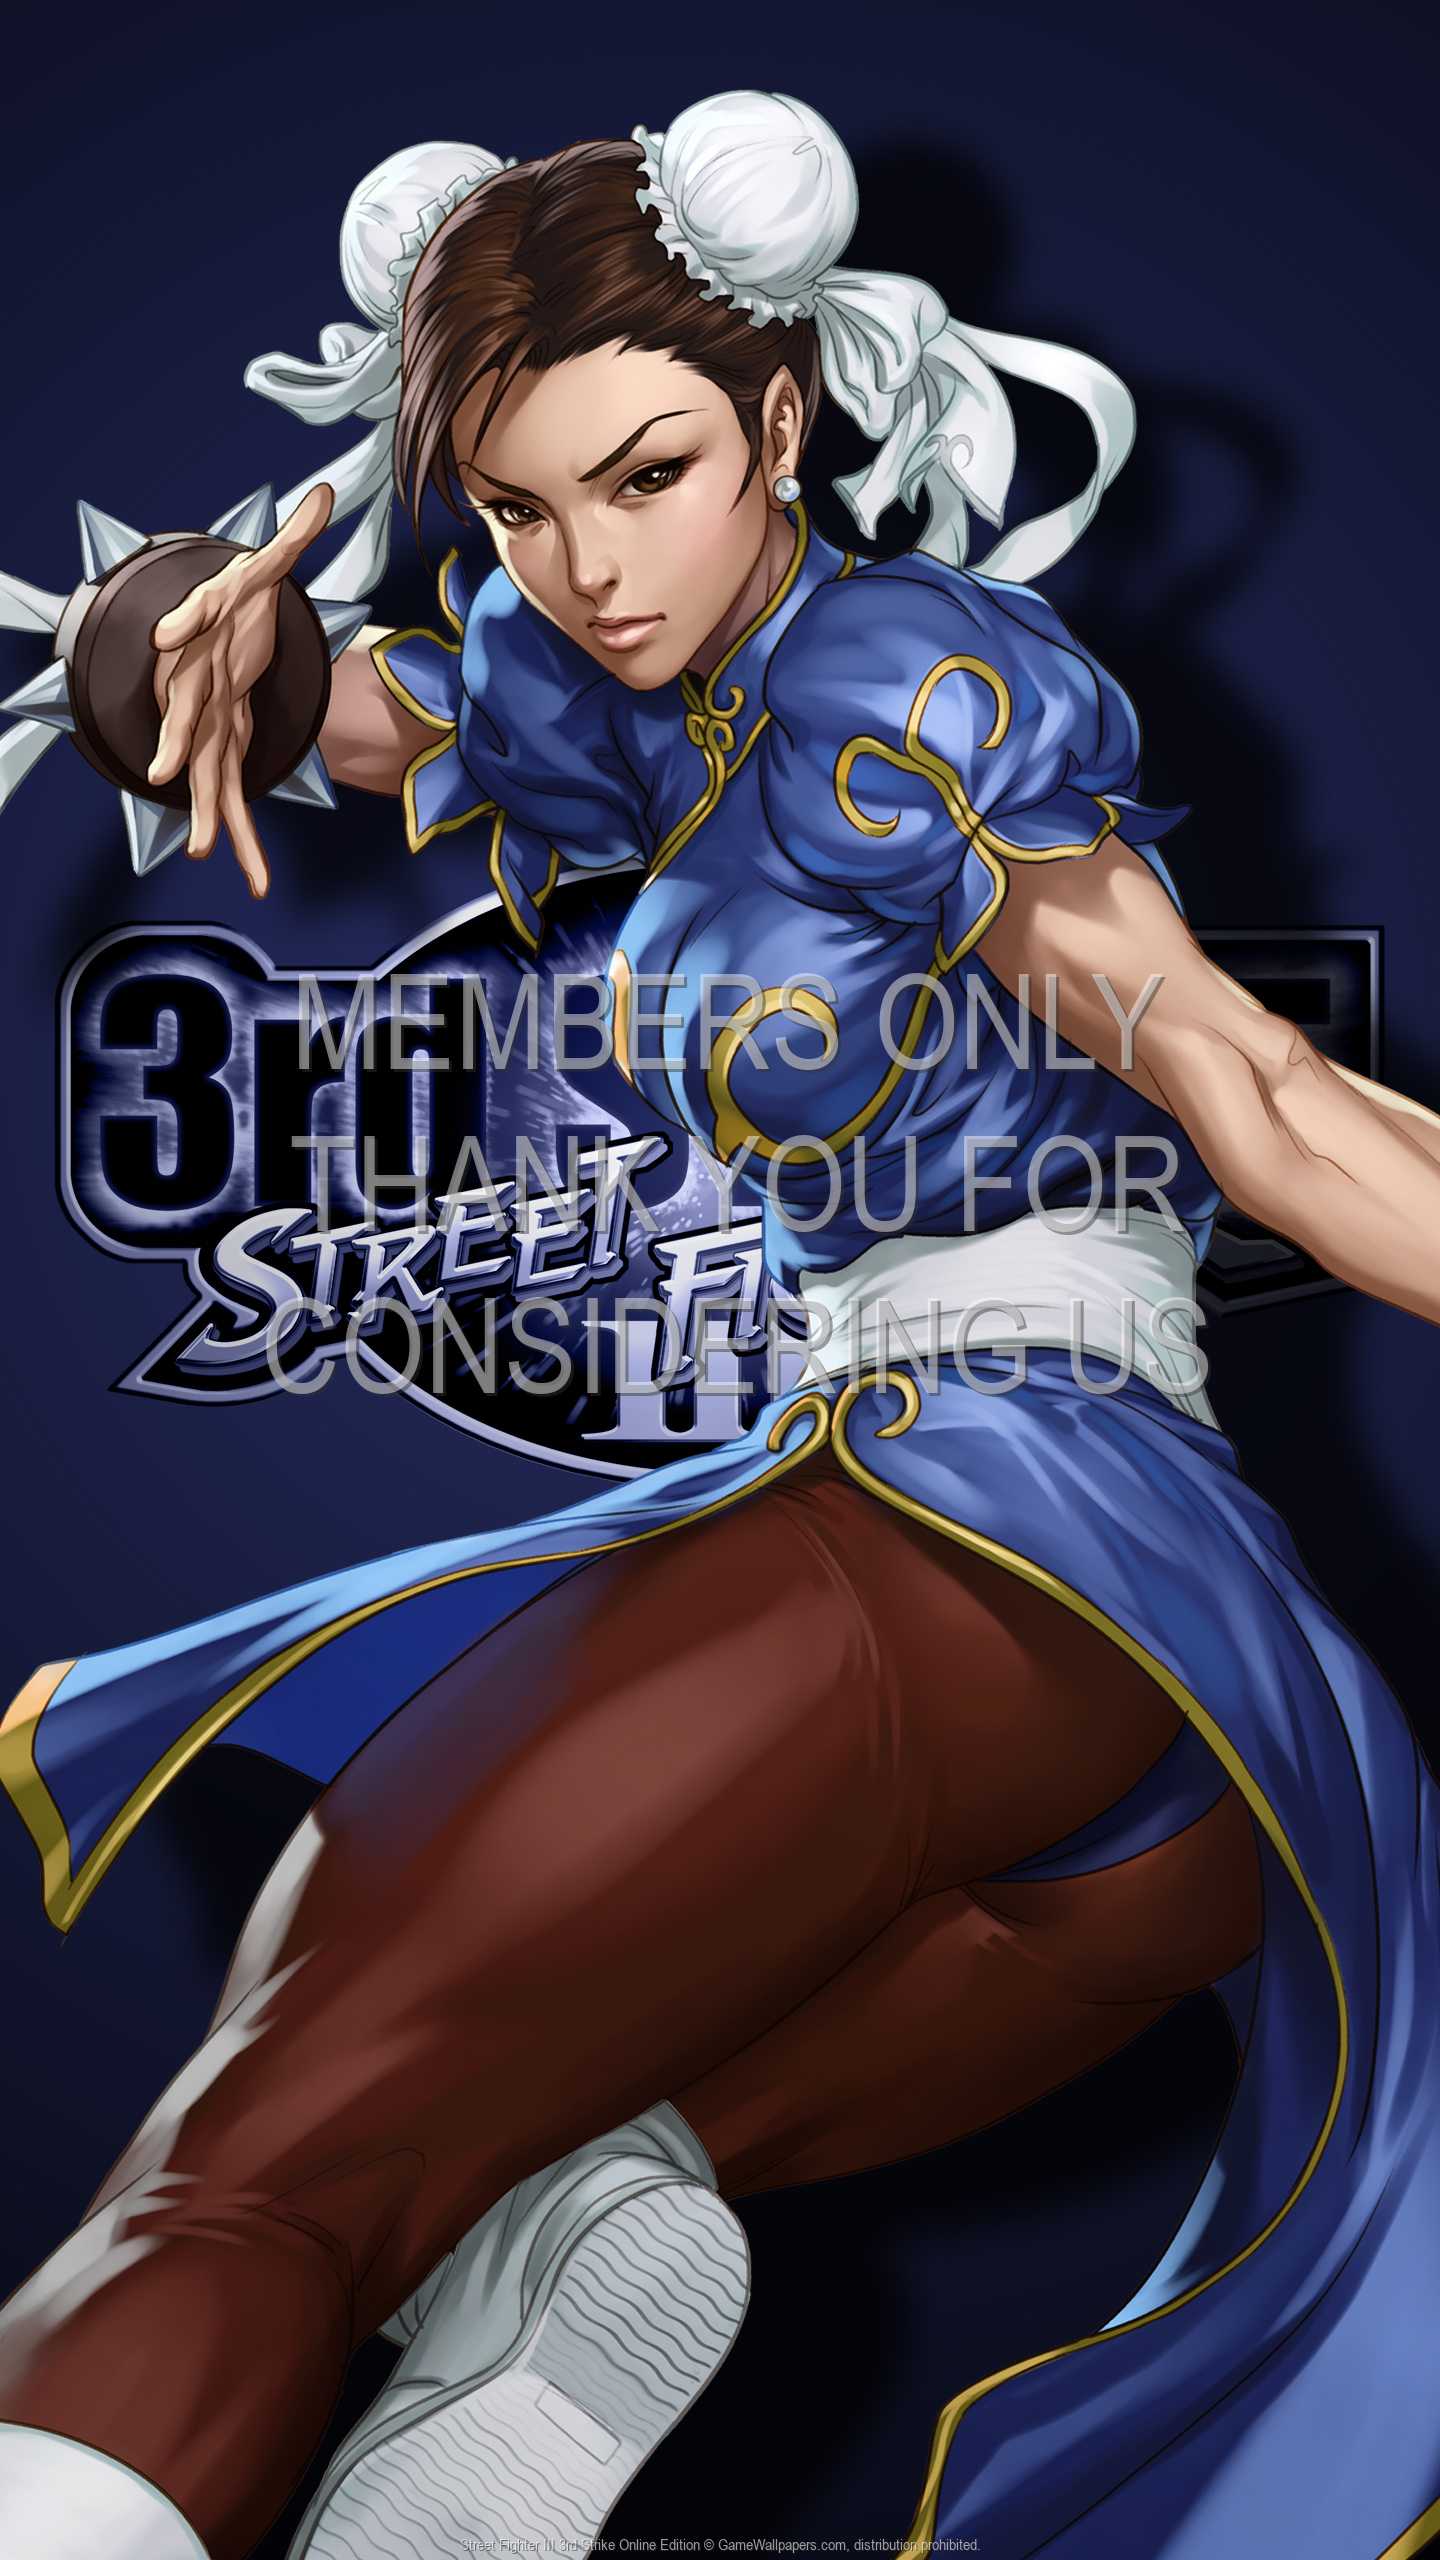 Street Fighter III: 3rd Strike Online Edition 1440p Vertical Mobile wallpaper or background 01